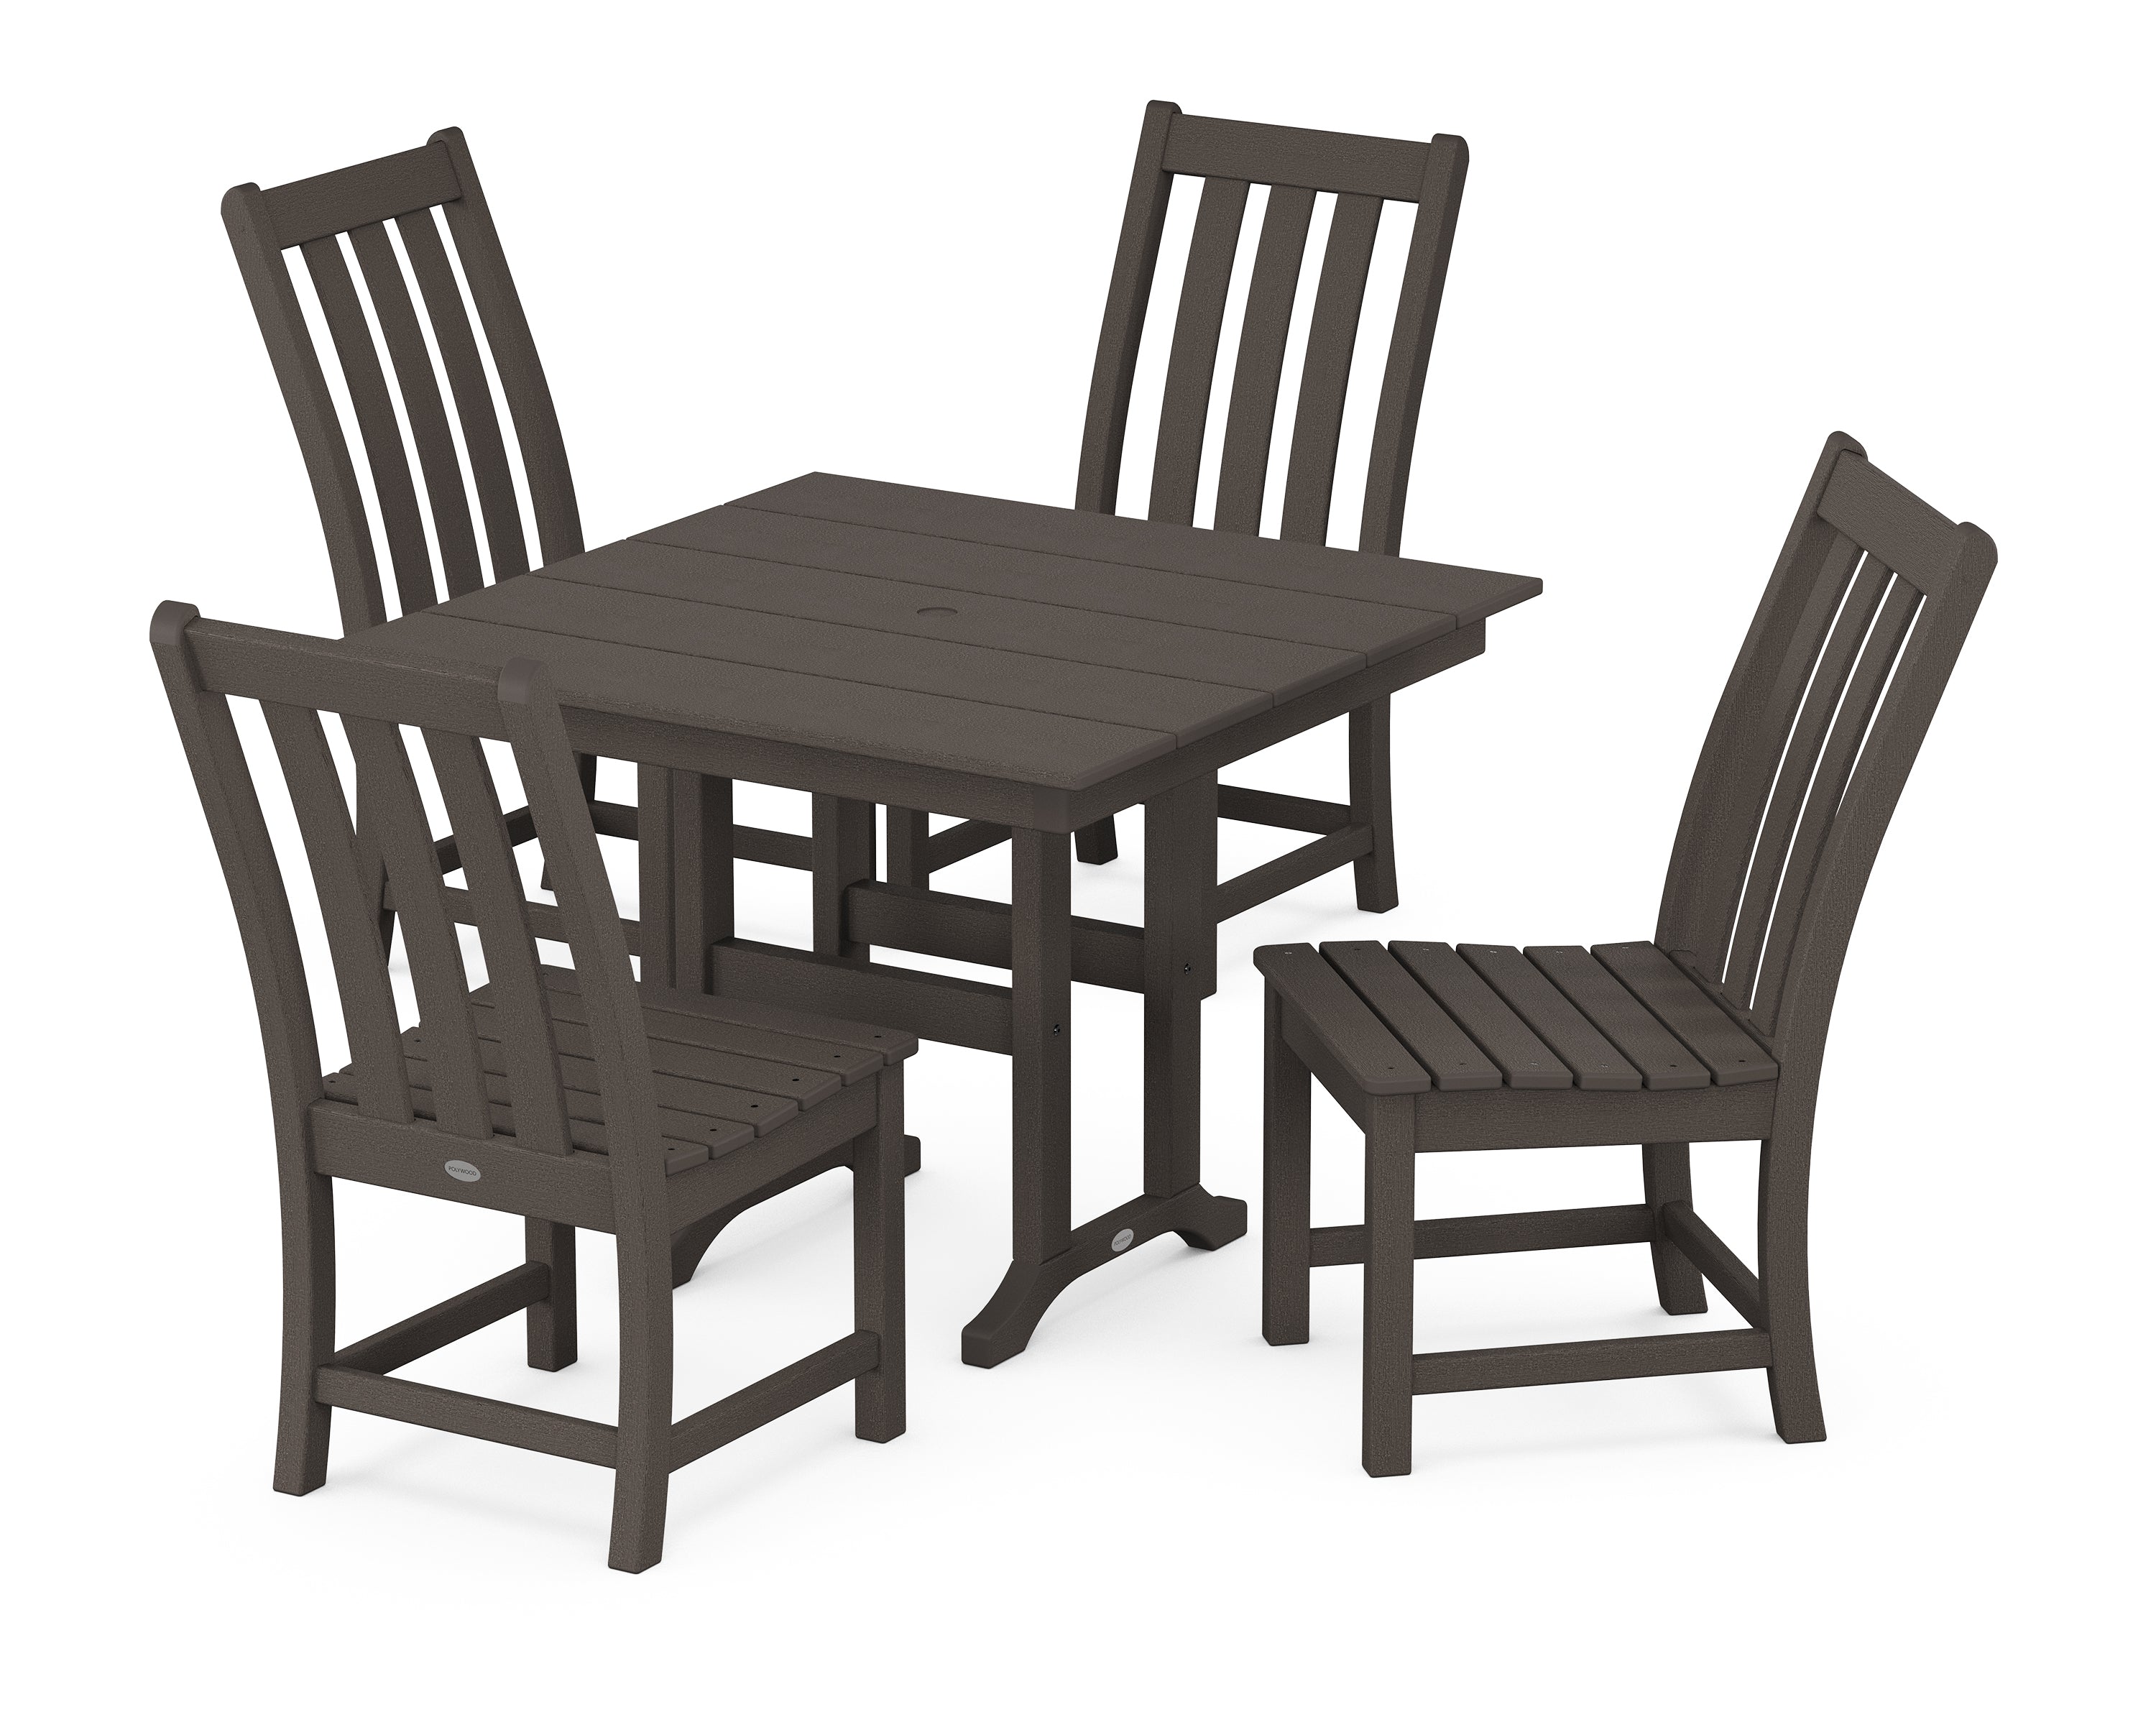 POLYWOOD® Vineyard Side Chair 5-Piece Farmhouse Dining Set in Vintage Coffee